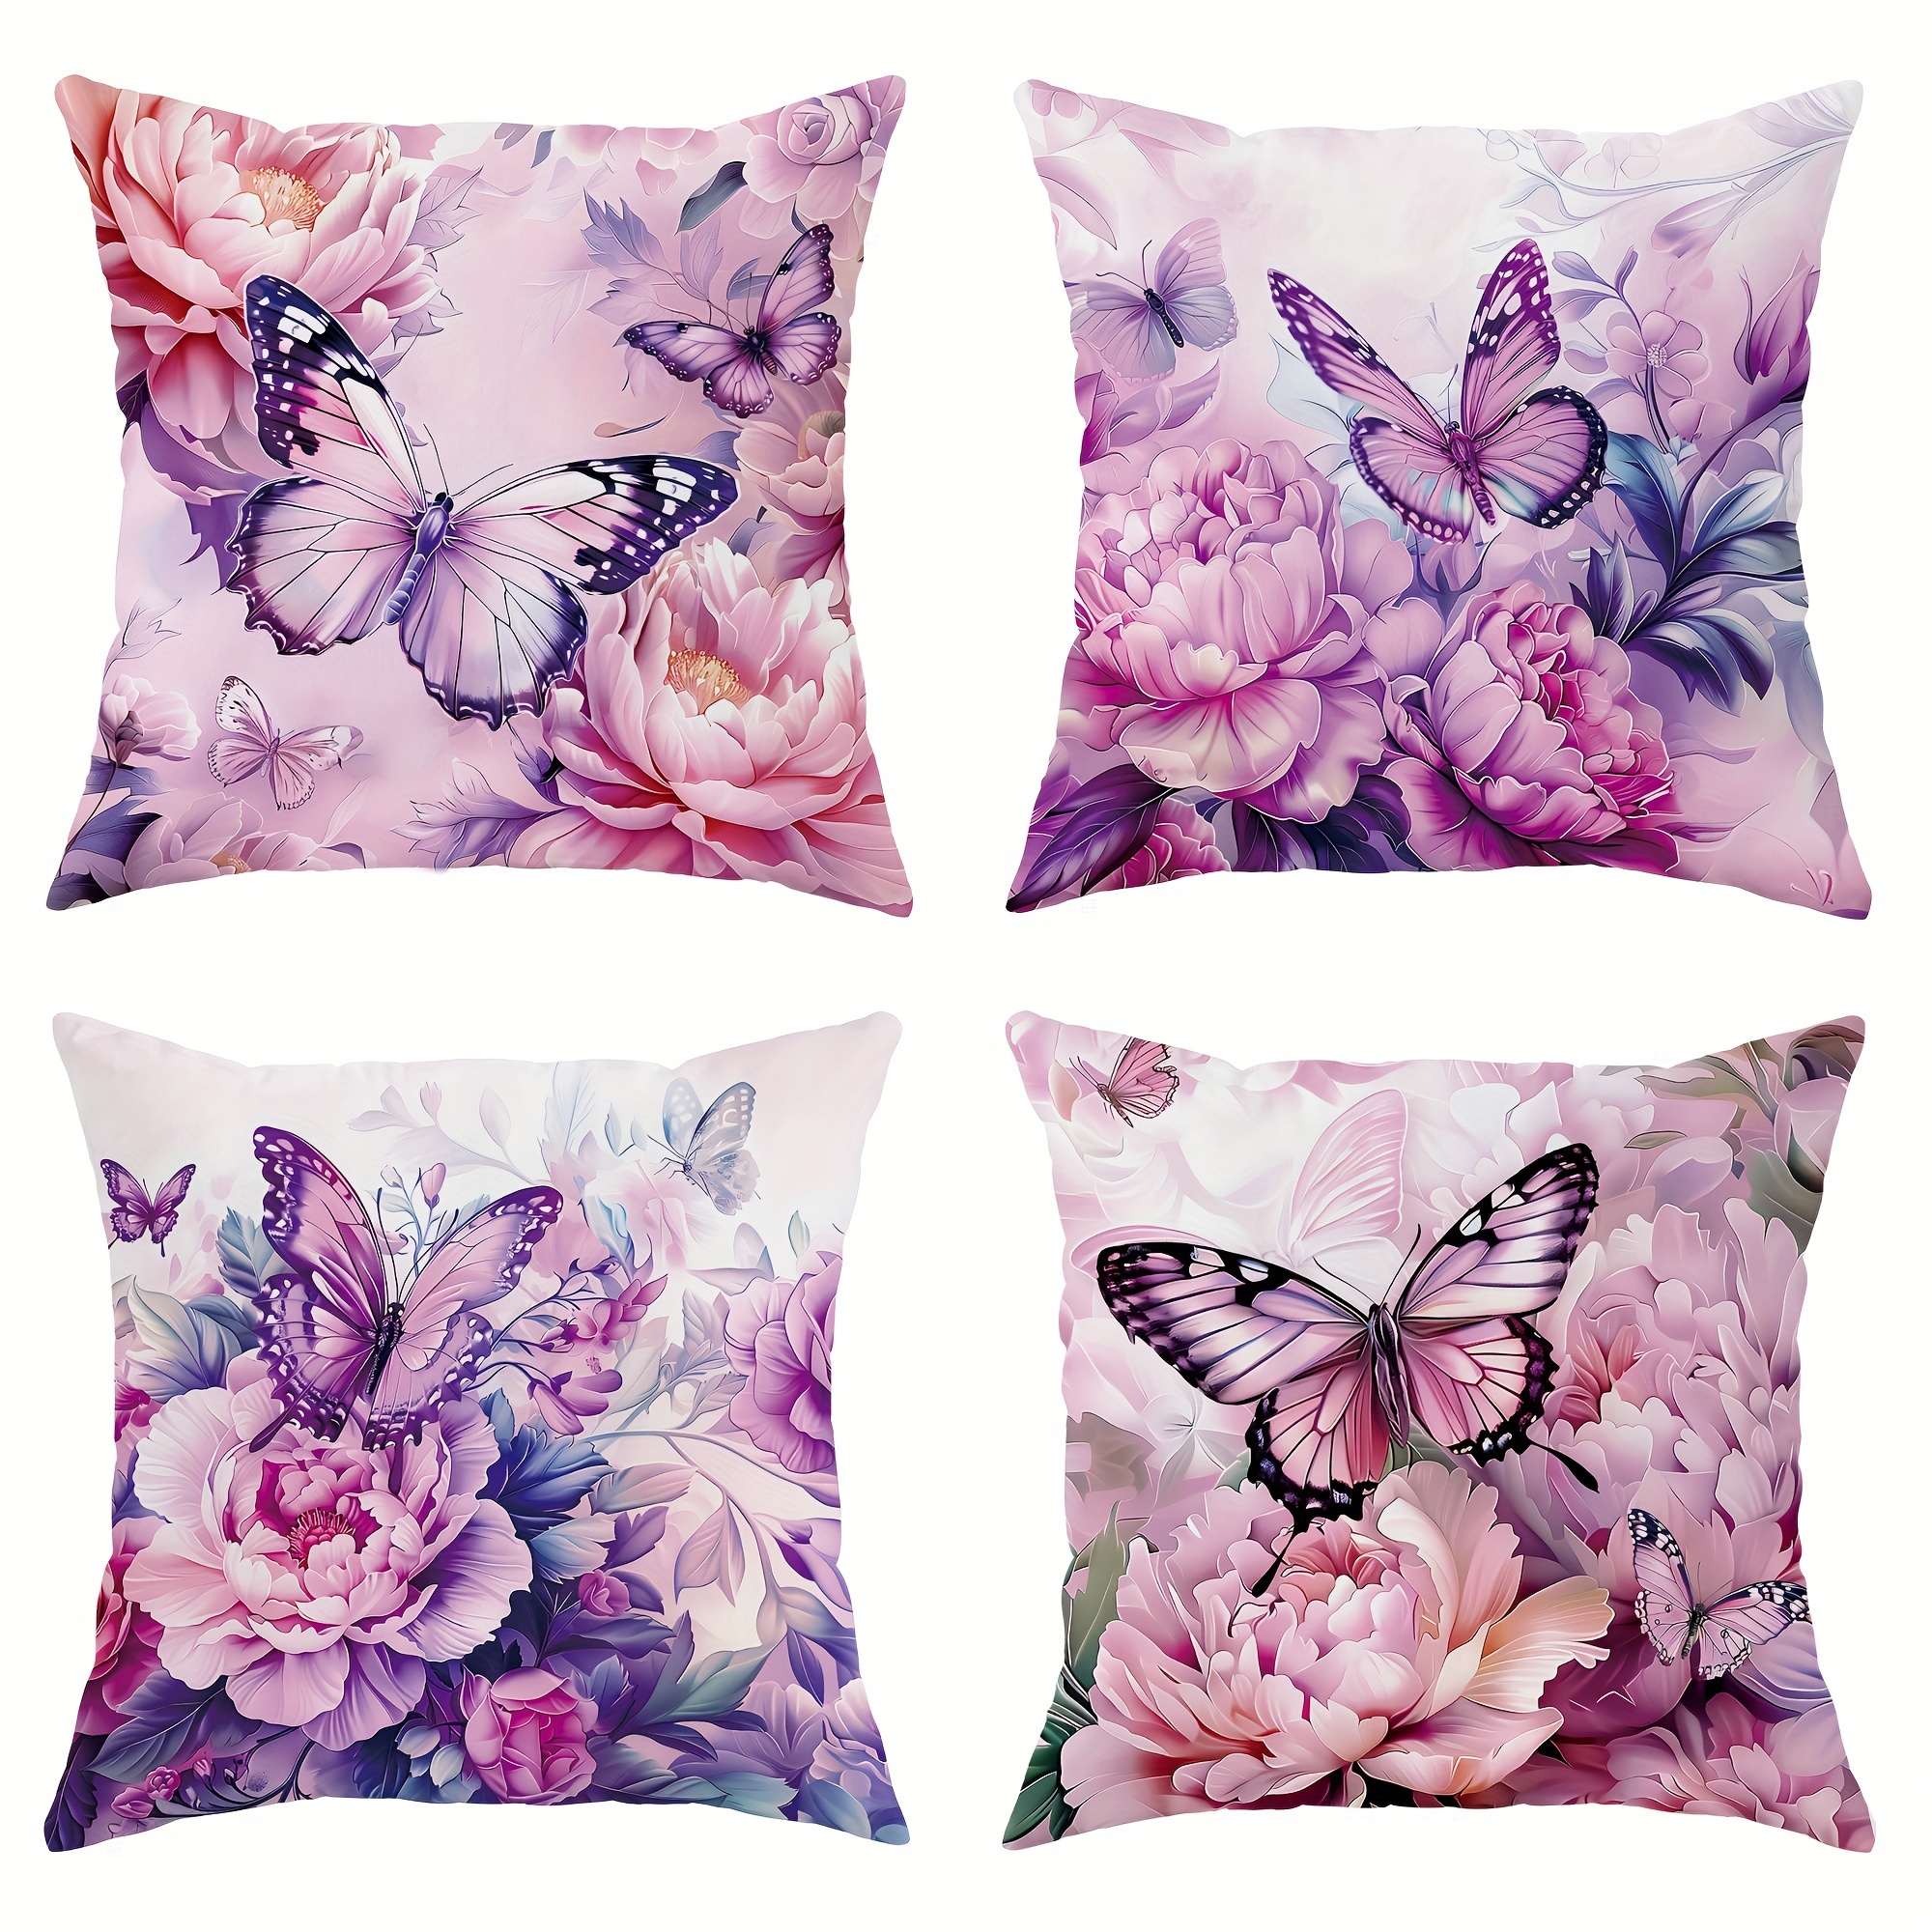 

4pcs, Velvet Throw Pillow Covers Butterfly Flower Pastoral Pink Decorative Pillow Covers 18*18 Inch Suitable For Summer And Autumn Living Room Bedroom Sofa Bed Decoration